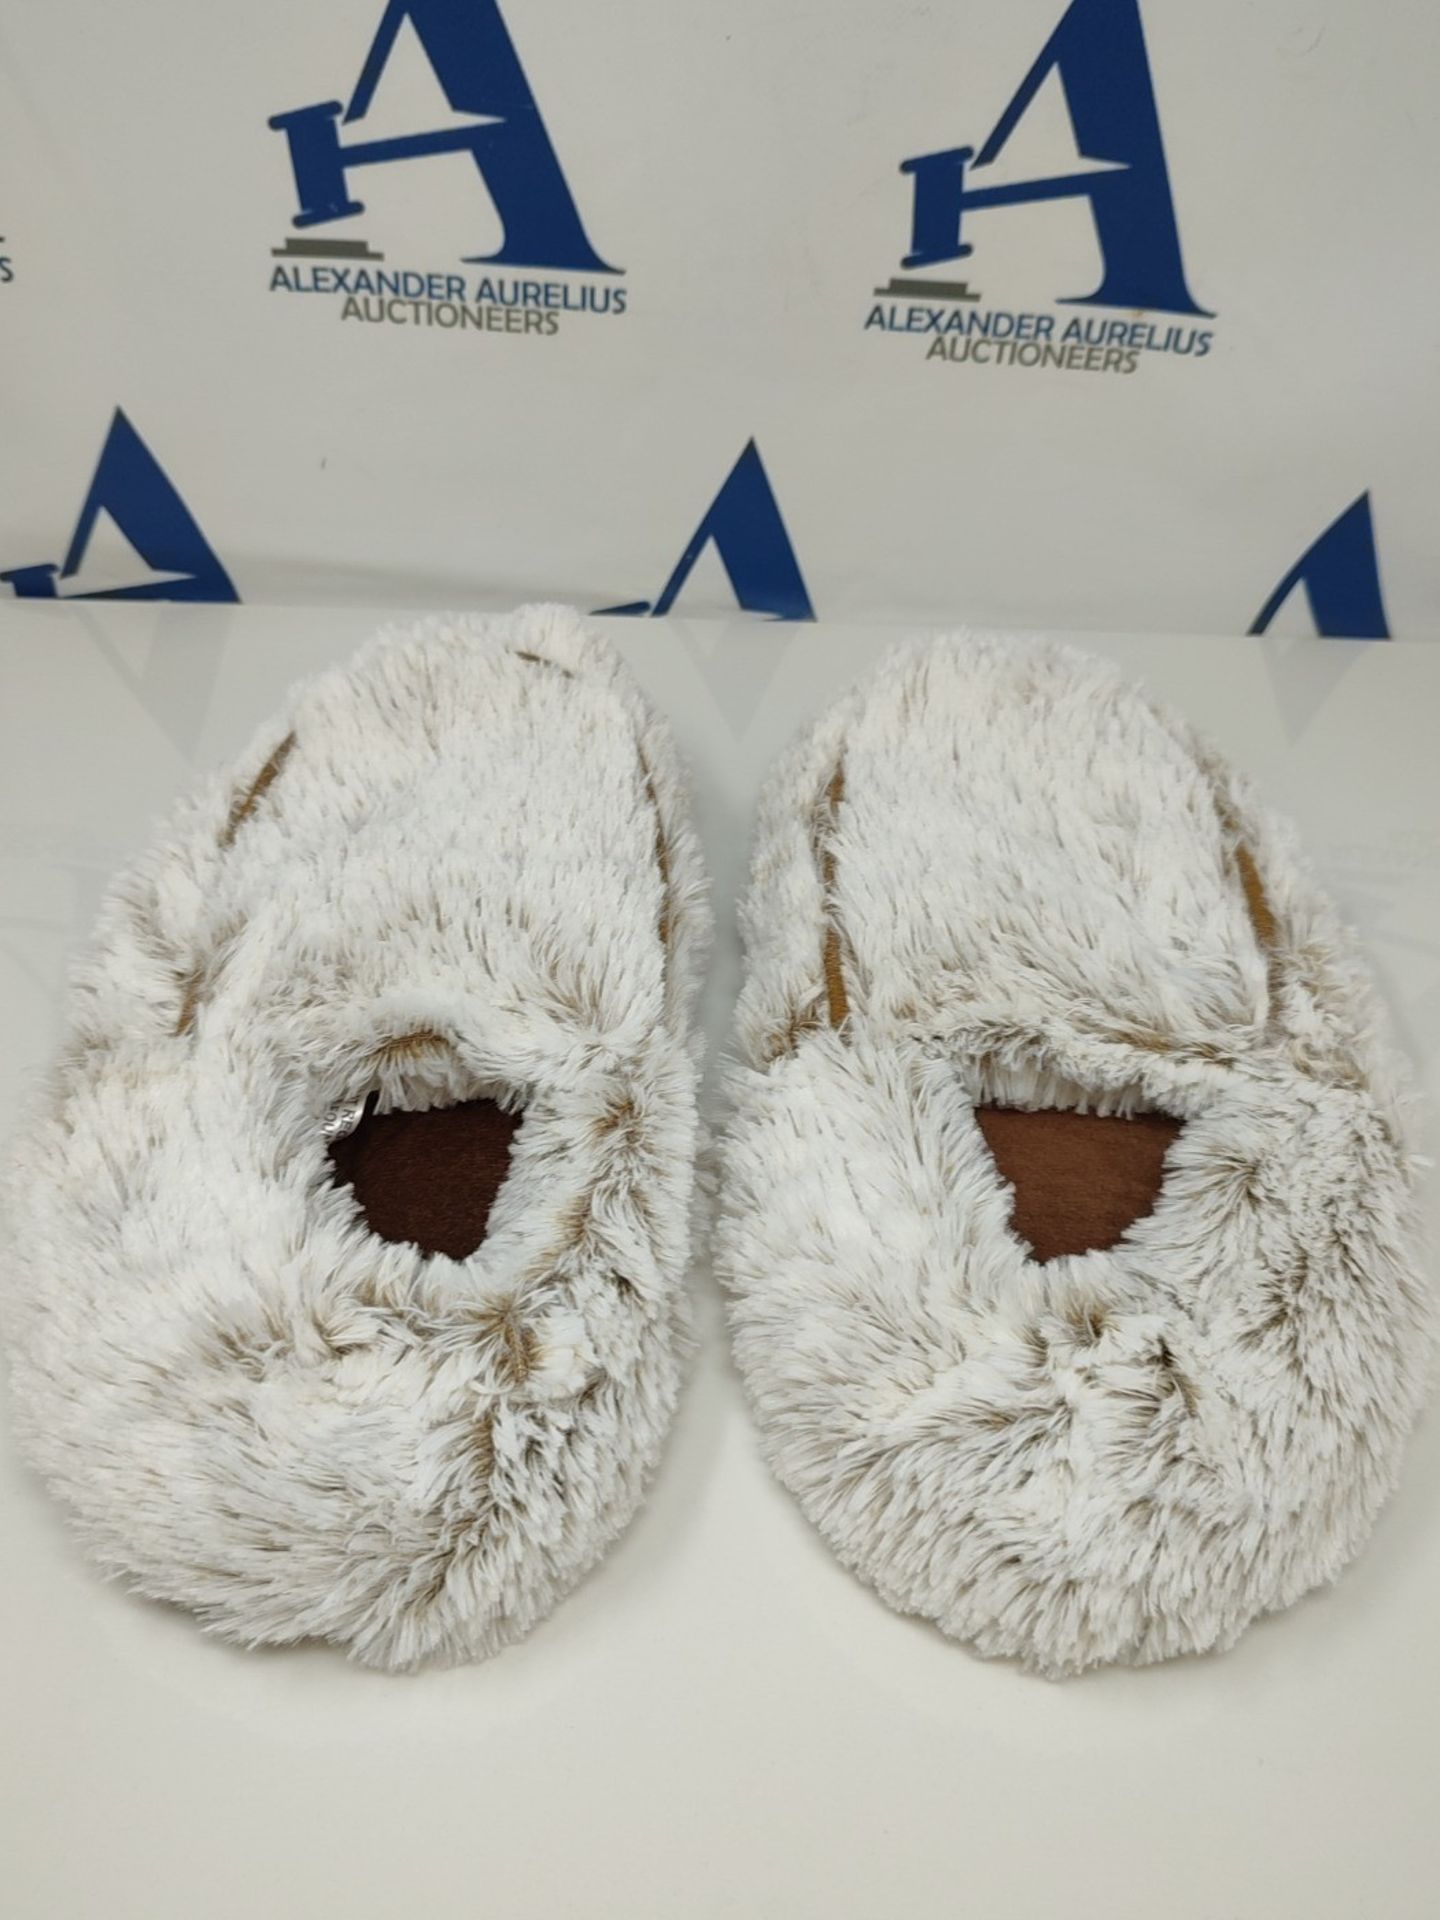 Warmies Fully Heatable Slippers Scented with French Marshmallow Lavender - Image 2 of 3